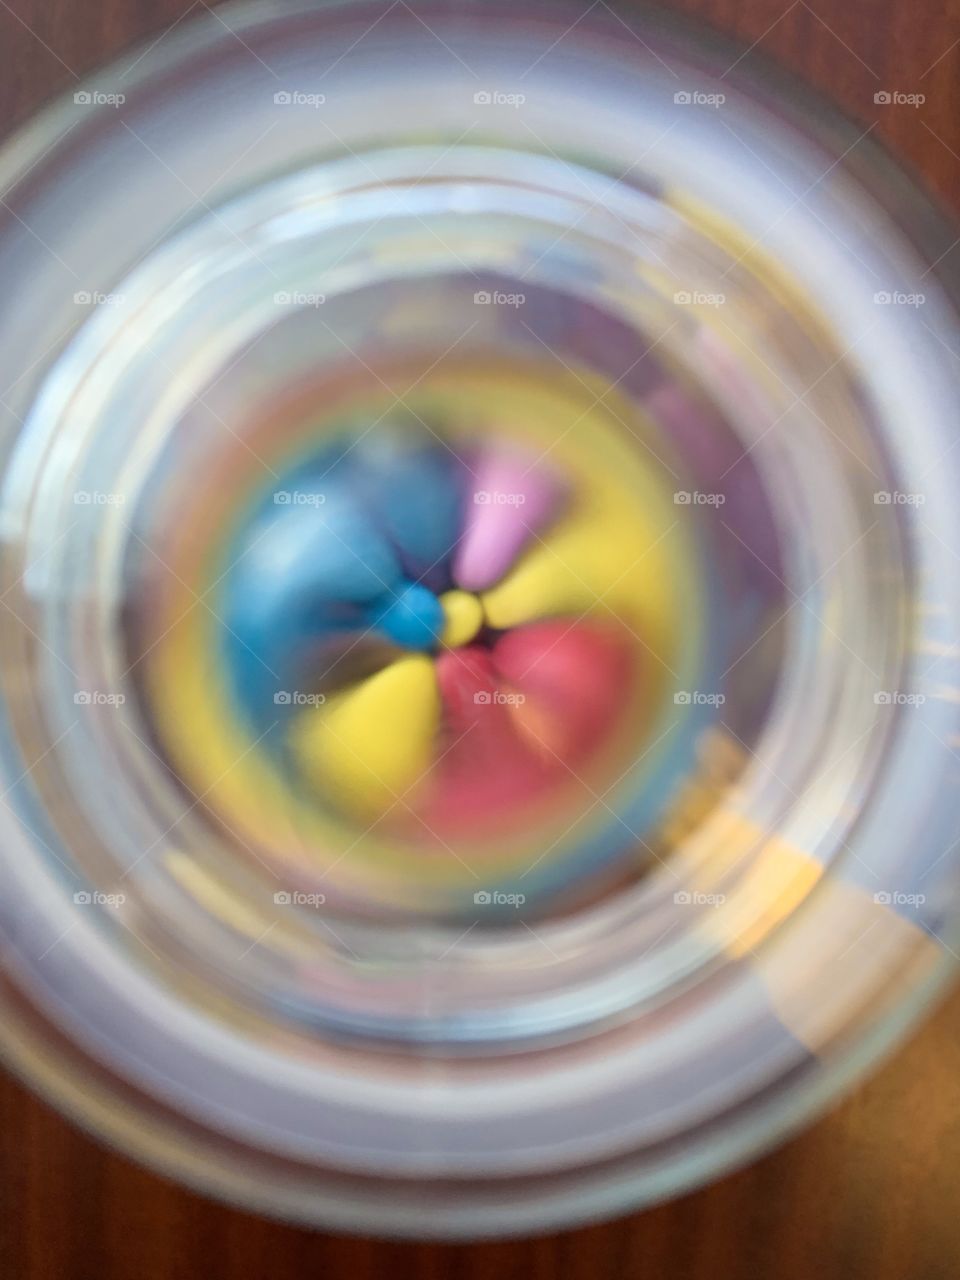 Smarties through a lens. So colourful and bright, I just want to get to them! Can’t wait for it to melt in my mouth